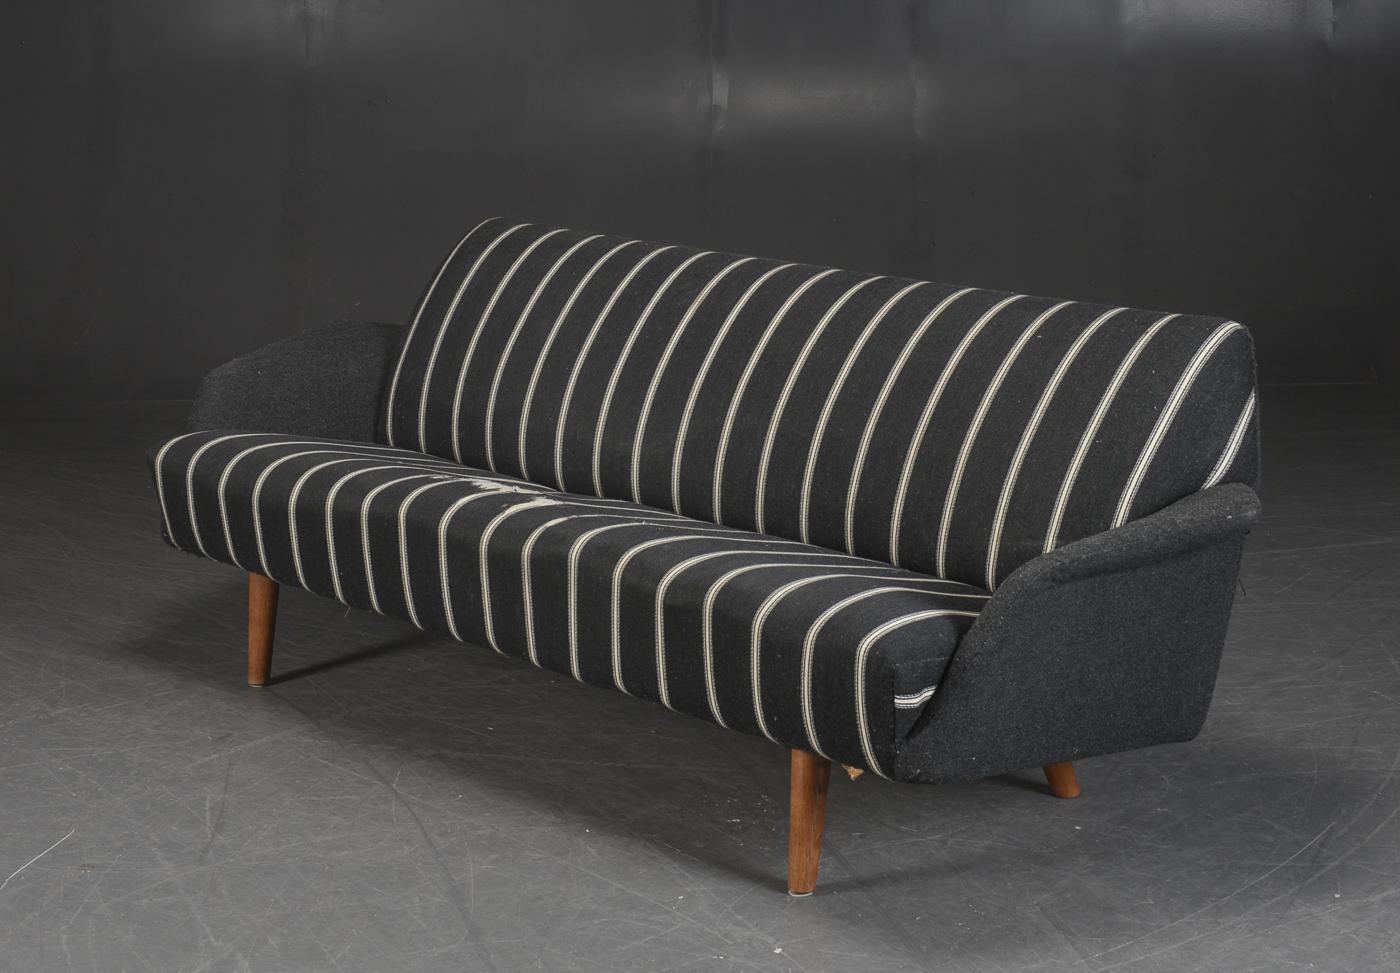 Stunning large Danish modern 1960s sofa designed by Illum Wikkelso as model 444 for Aarhus Møbelfabri the early 1960s. Wikkelso's sofa design of the 1960s were really some of the coolest and most iconic sofa designs of the 1960s Denmark and while